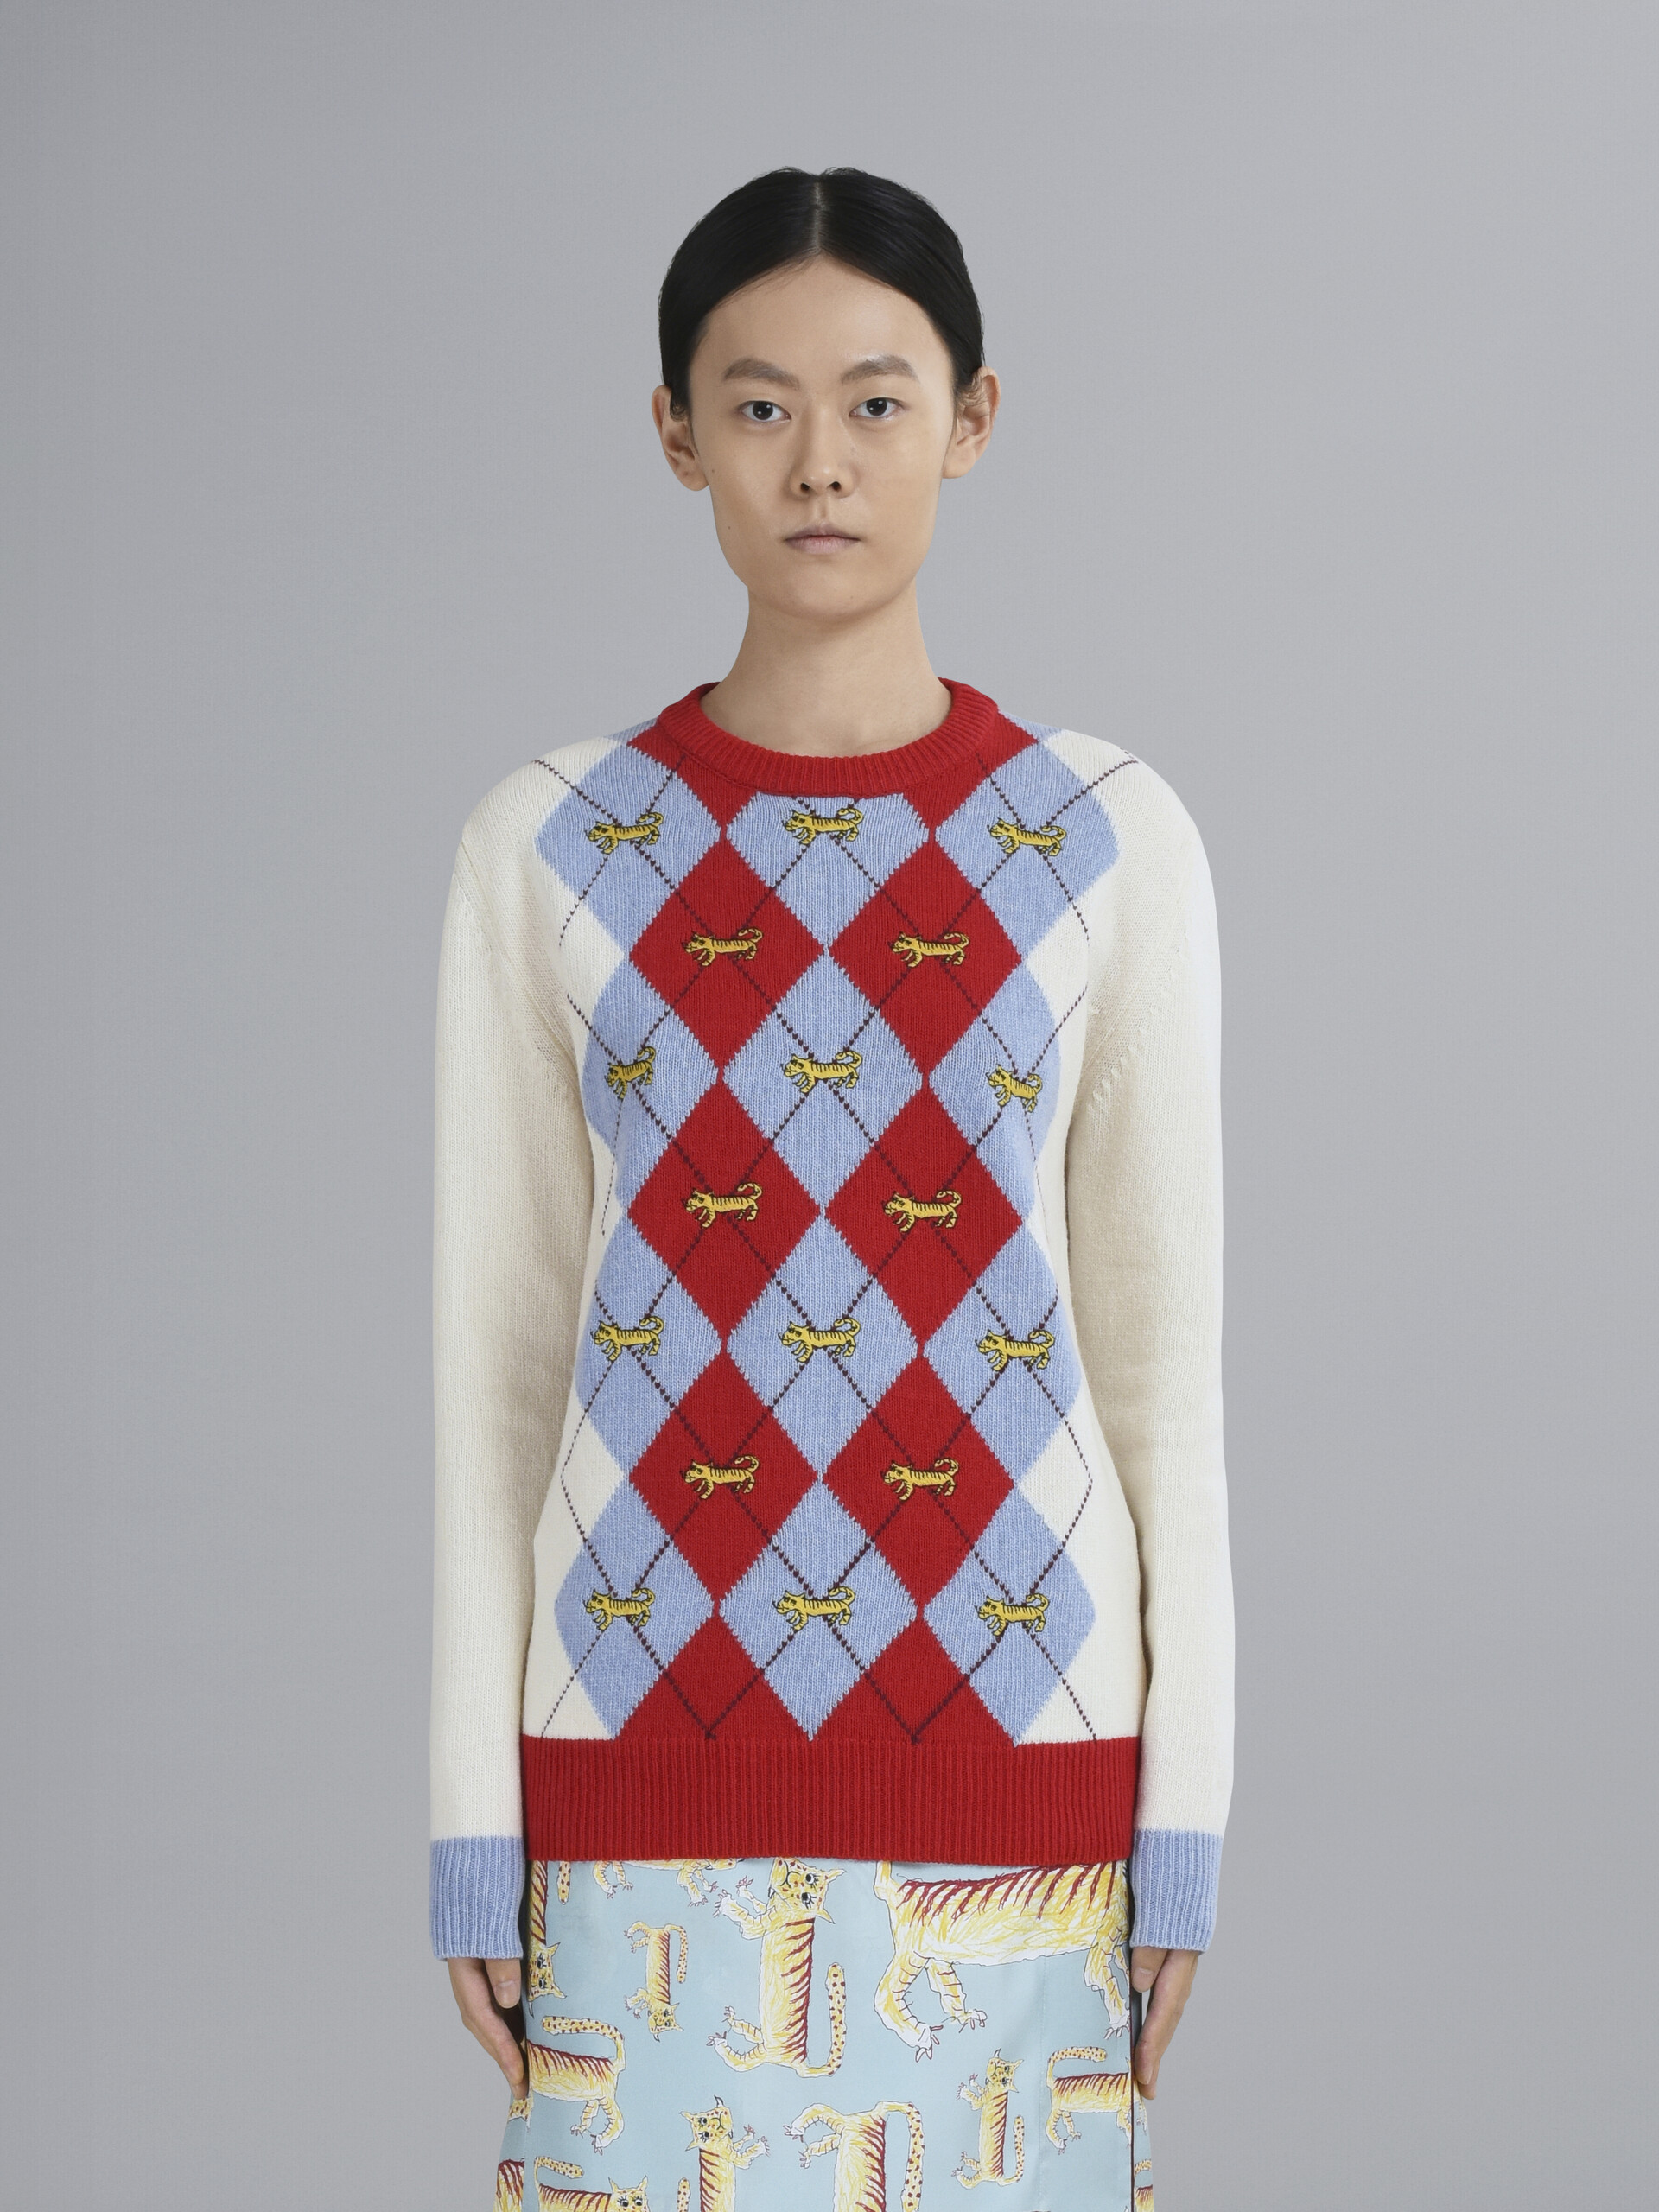 Shetland sweater with Naif Tiger Argyle motif - Pullovers - Image 2